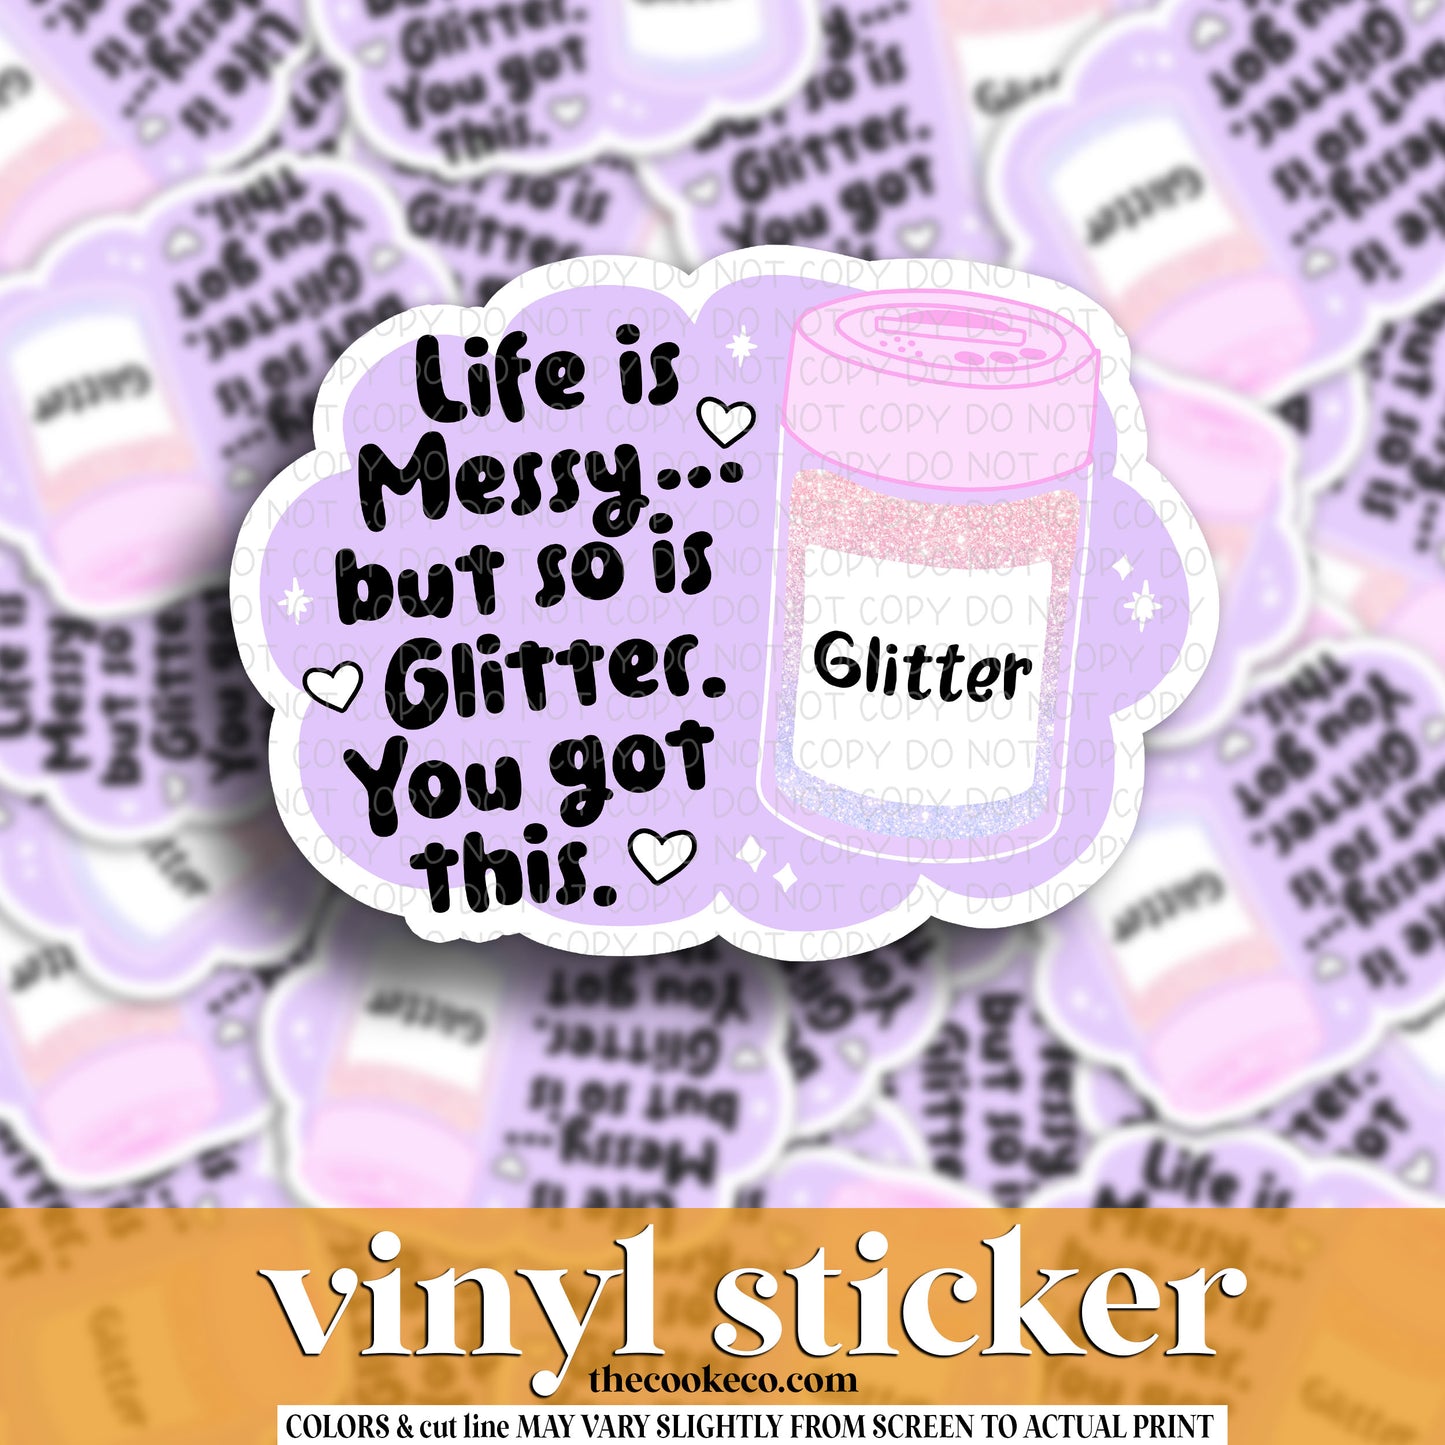 Vinyl Sticker | #V1567 -  LIFE IS MESSY BUT SO IS GLITTER. YOU GOT THIS